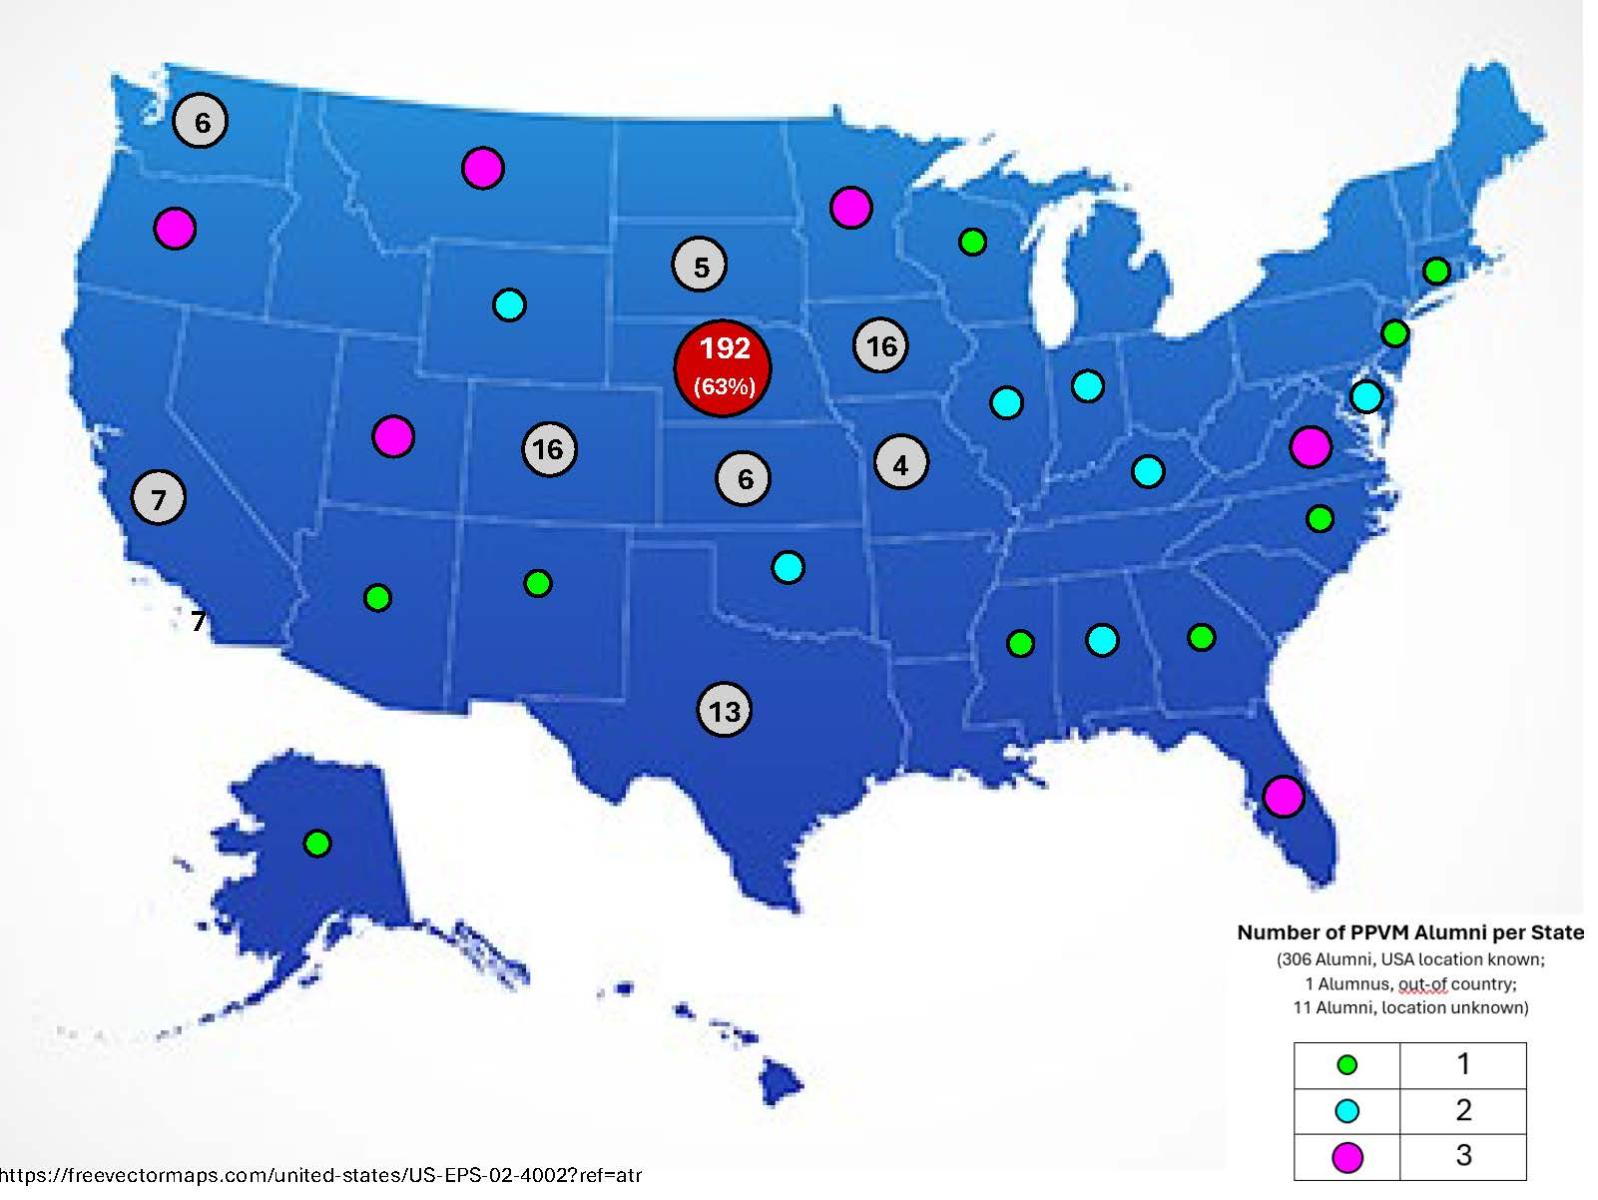 Map of USA showing practice location for PPVM Alumni in the USA